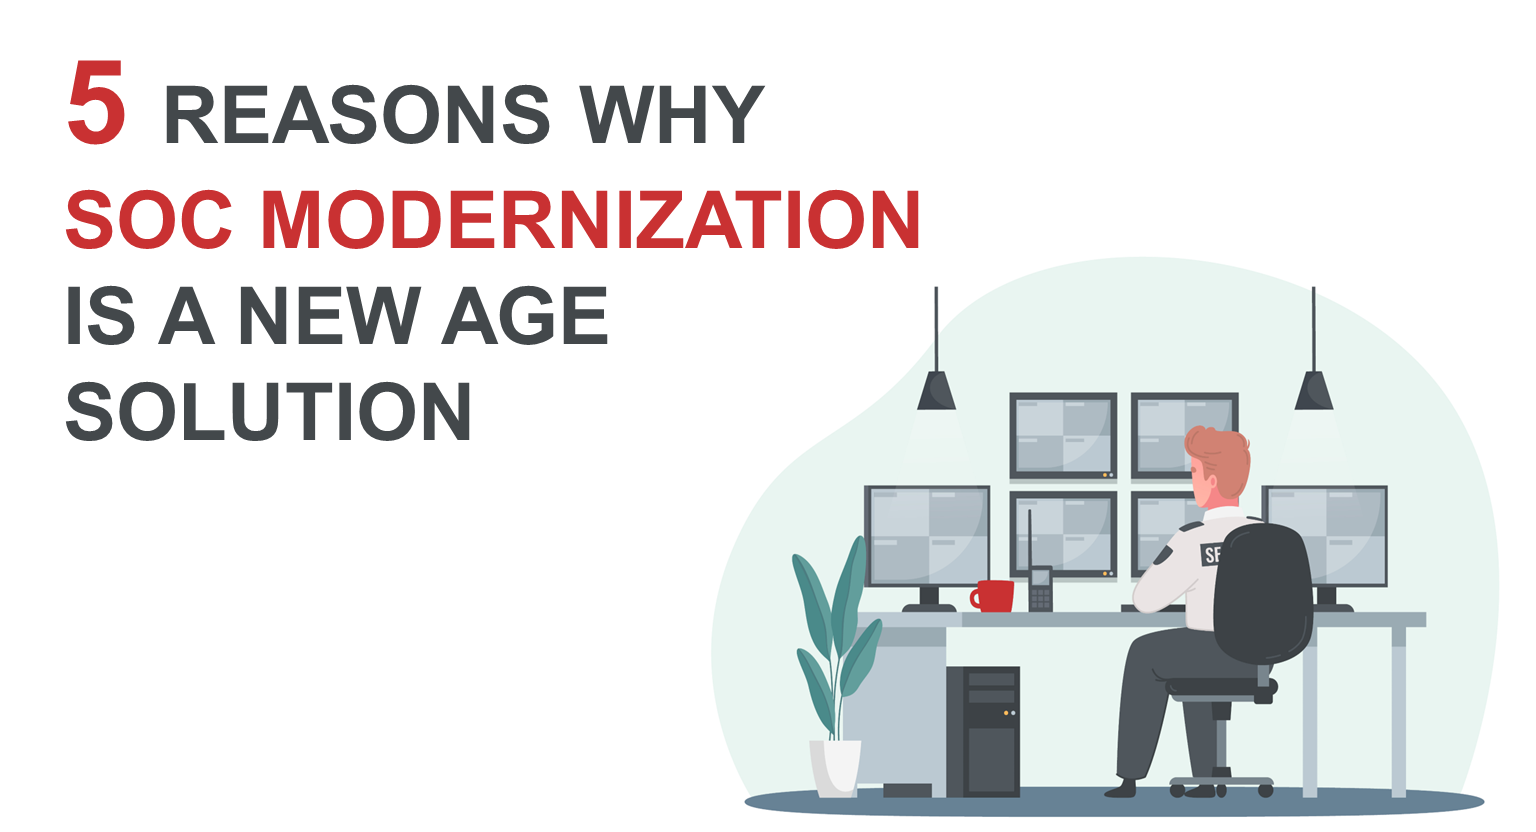 5 Reasons Why SOC Modernization is a New Age Solution